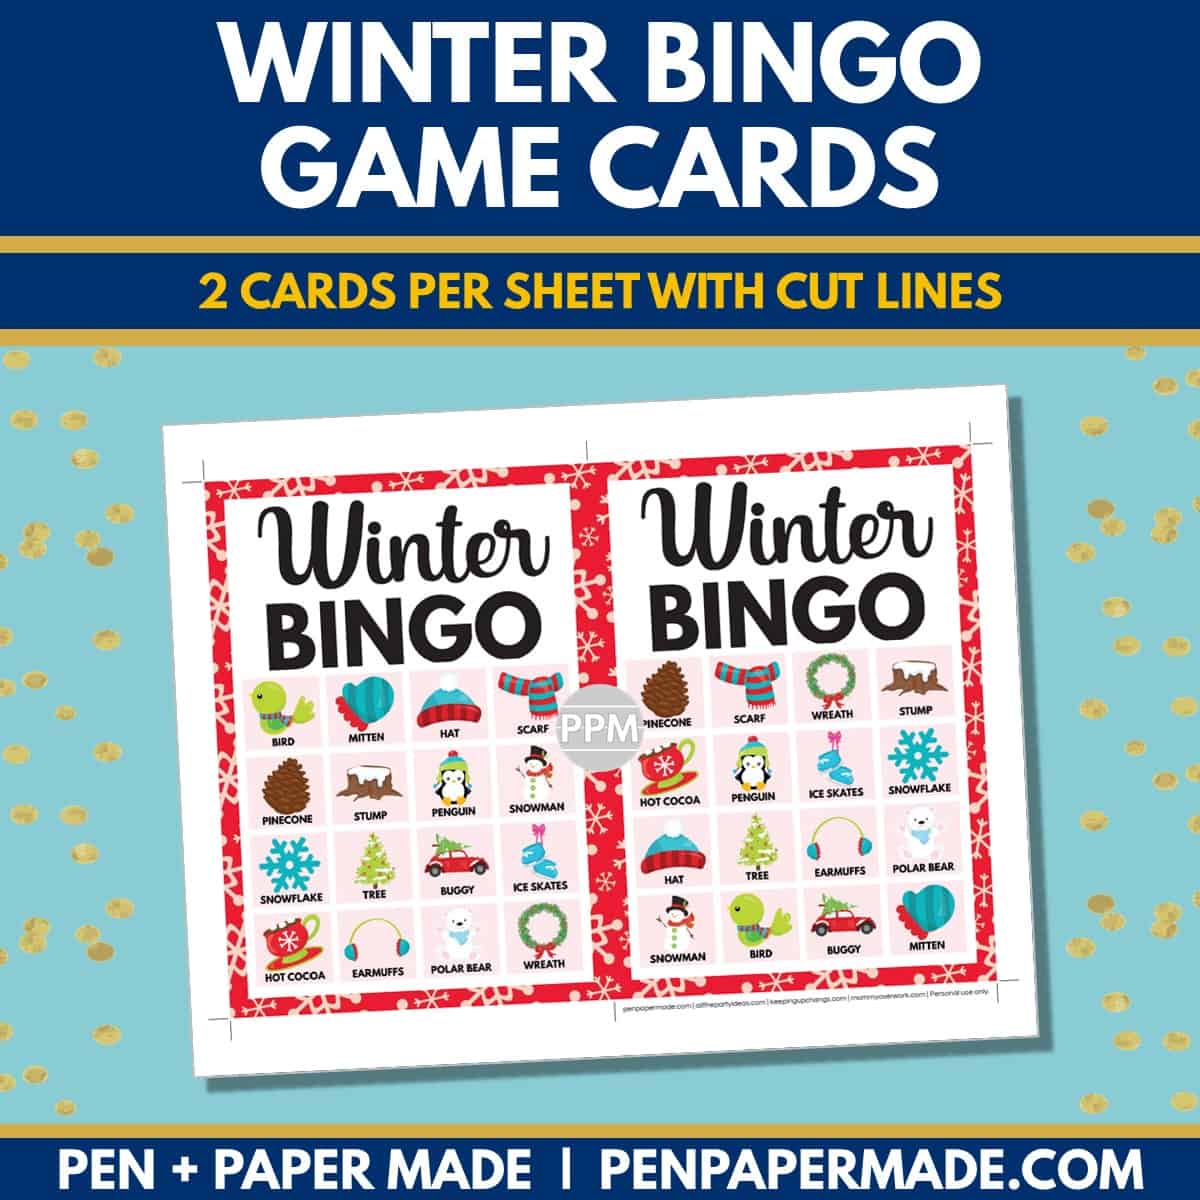 winter bingo card 4x4 5x7 game boards with images and text words.